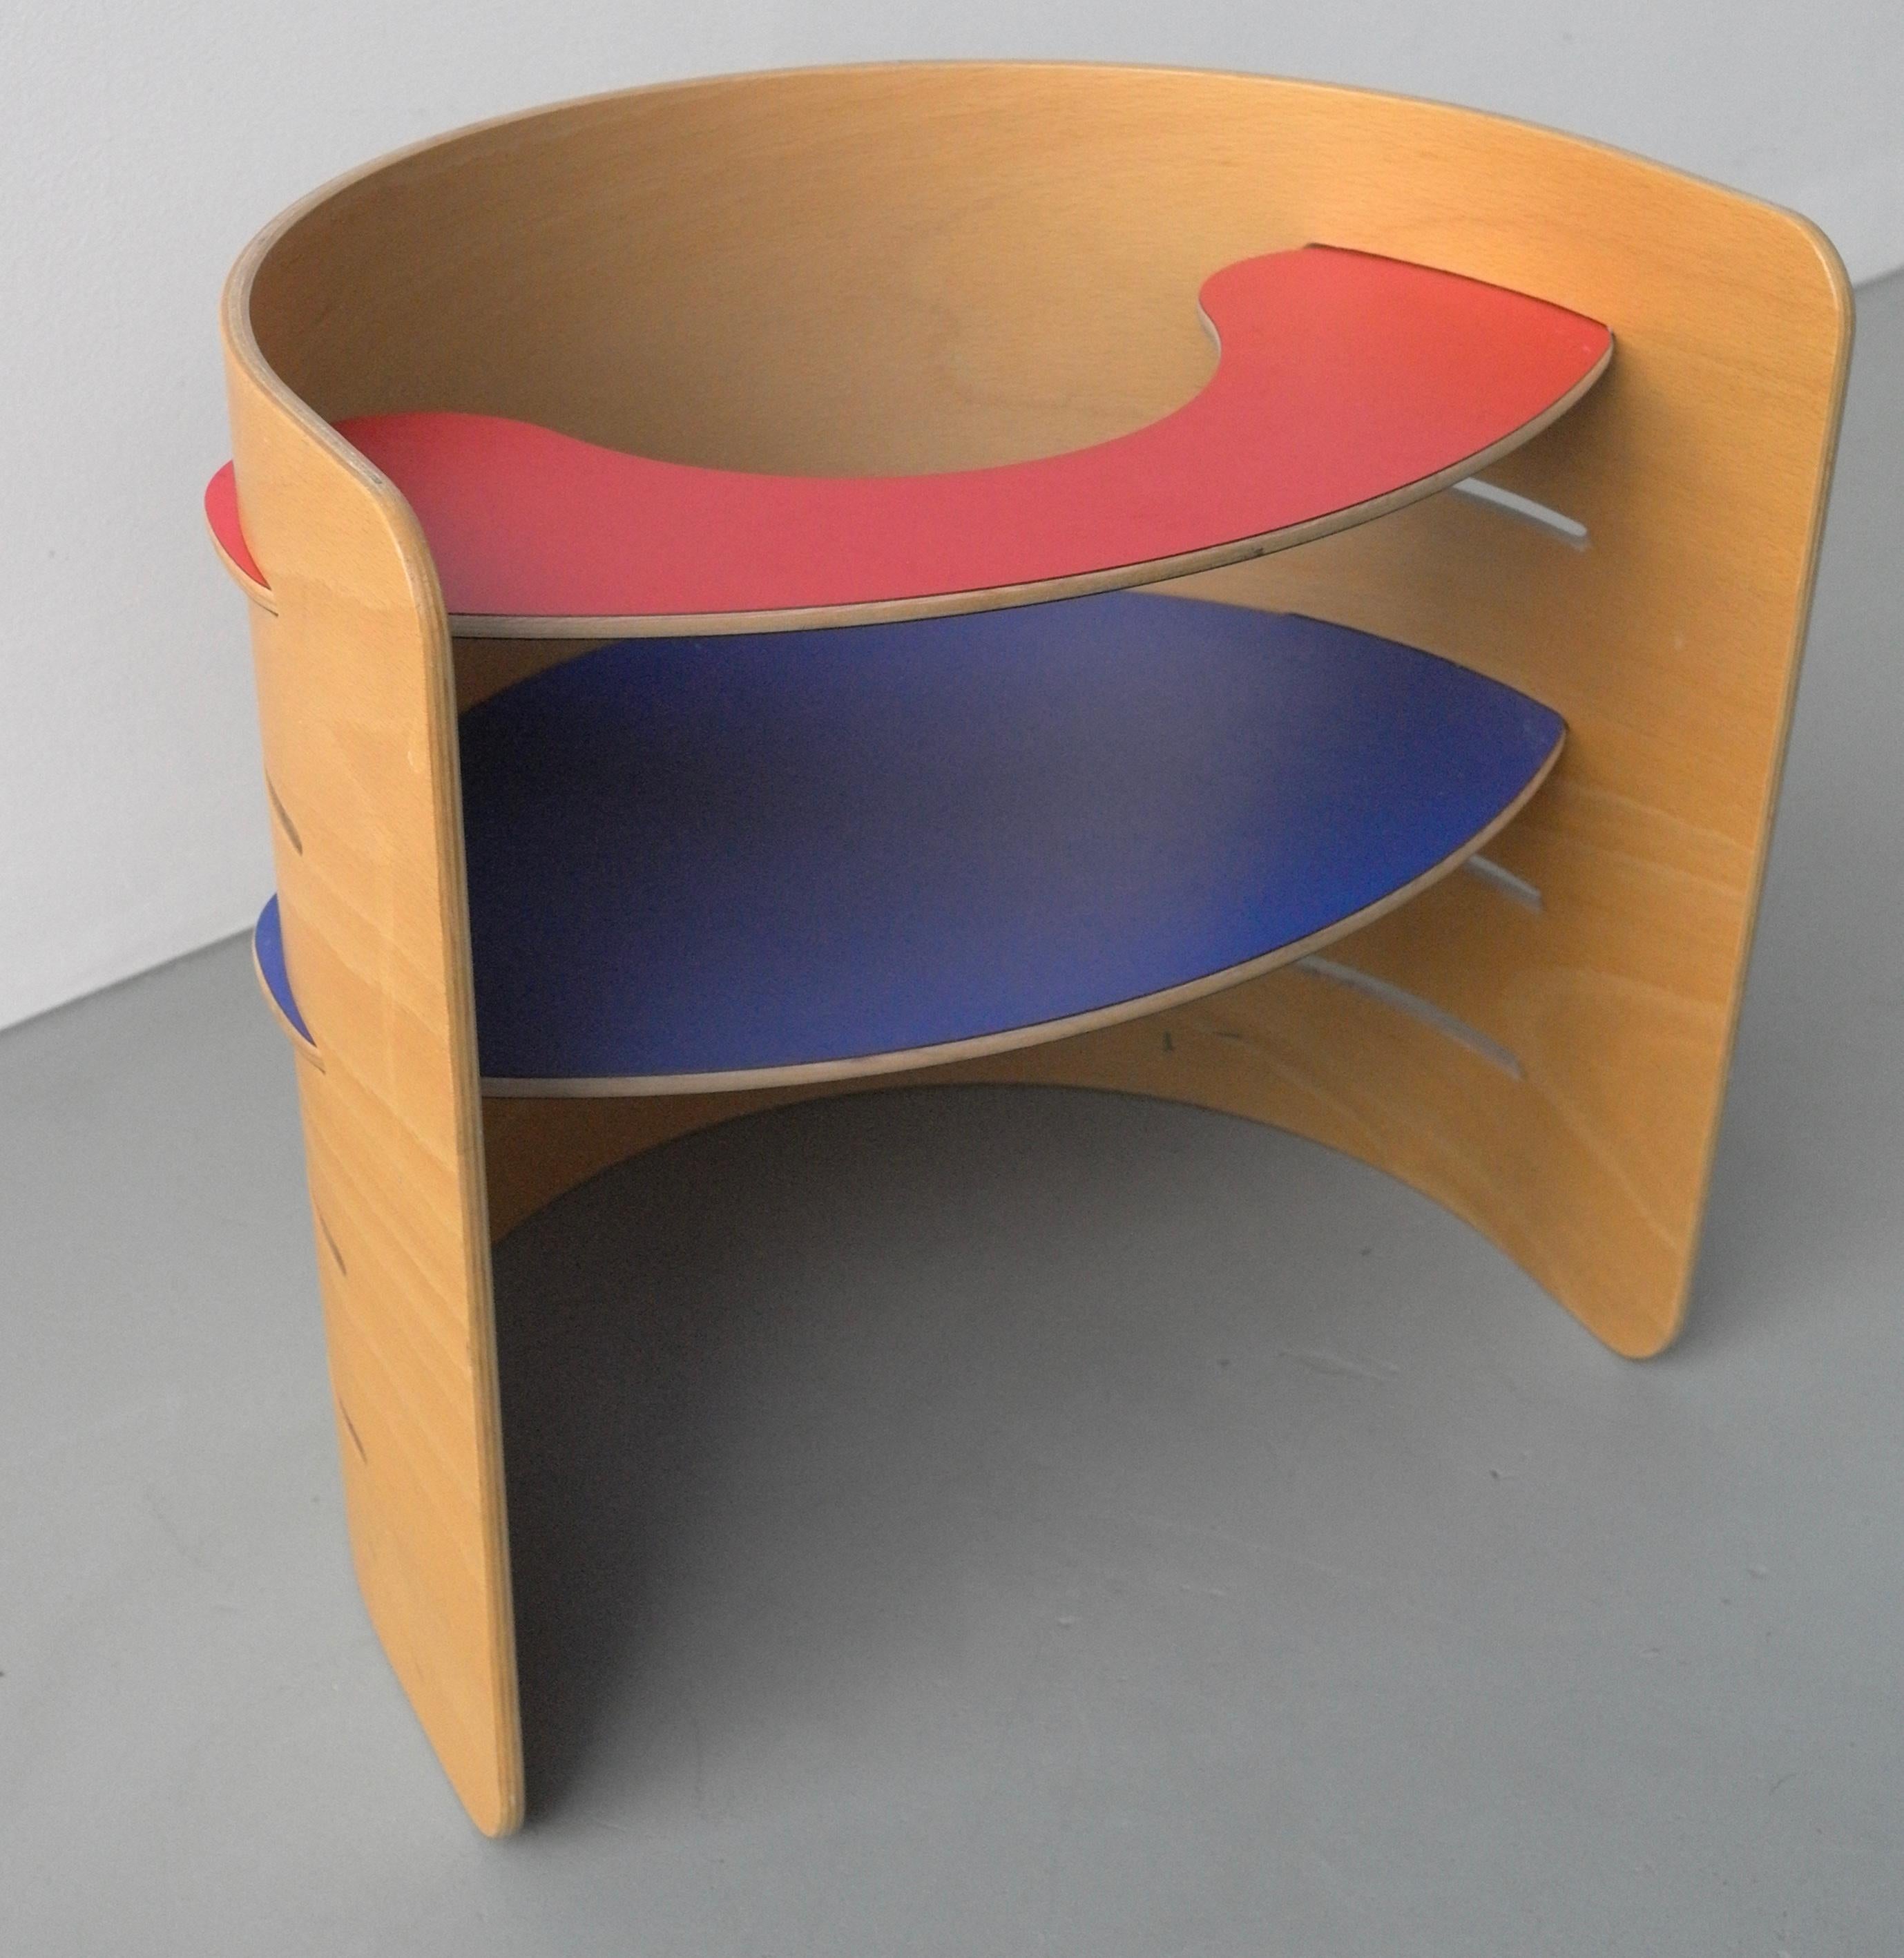 Mid-Century Modern Red and Blue Child's Chair by Architect Kristian Vedel, Denmark, 1952